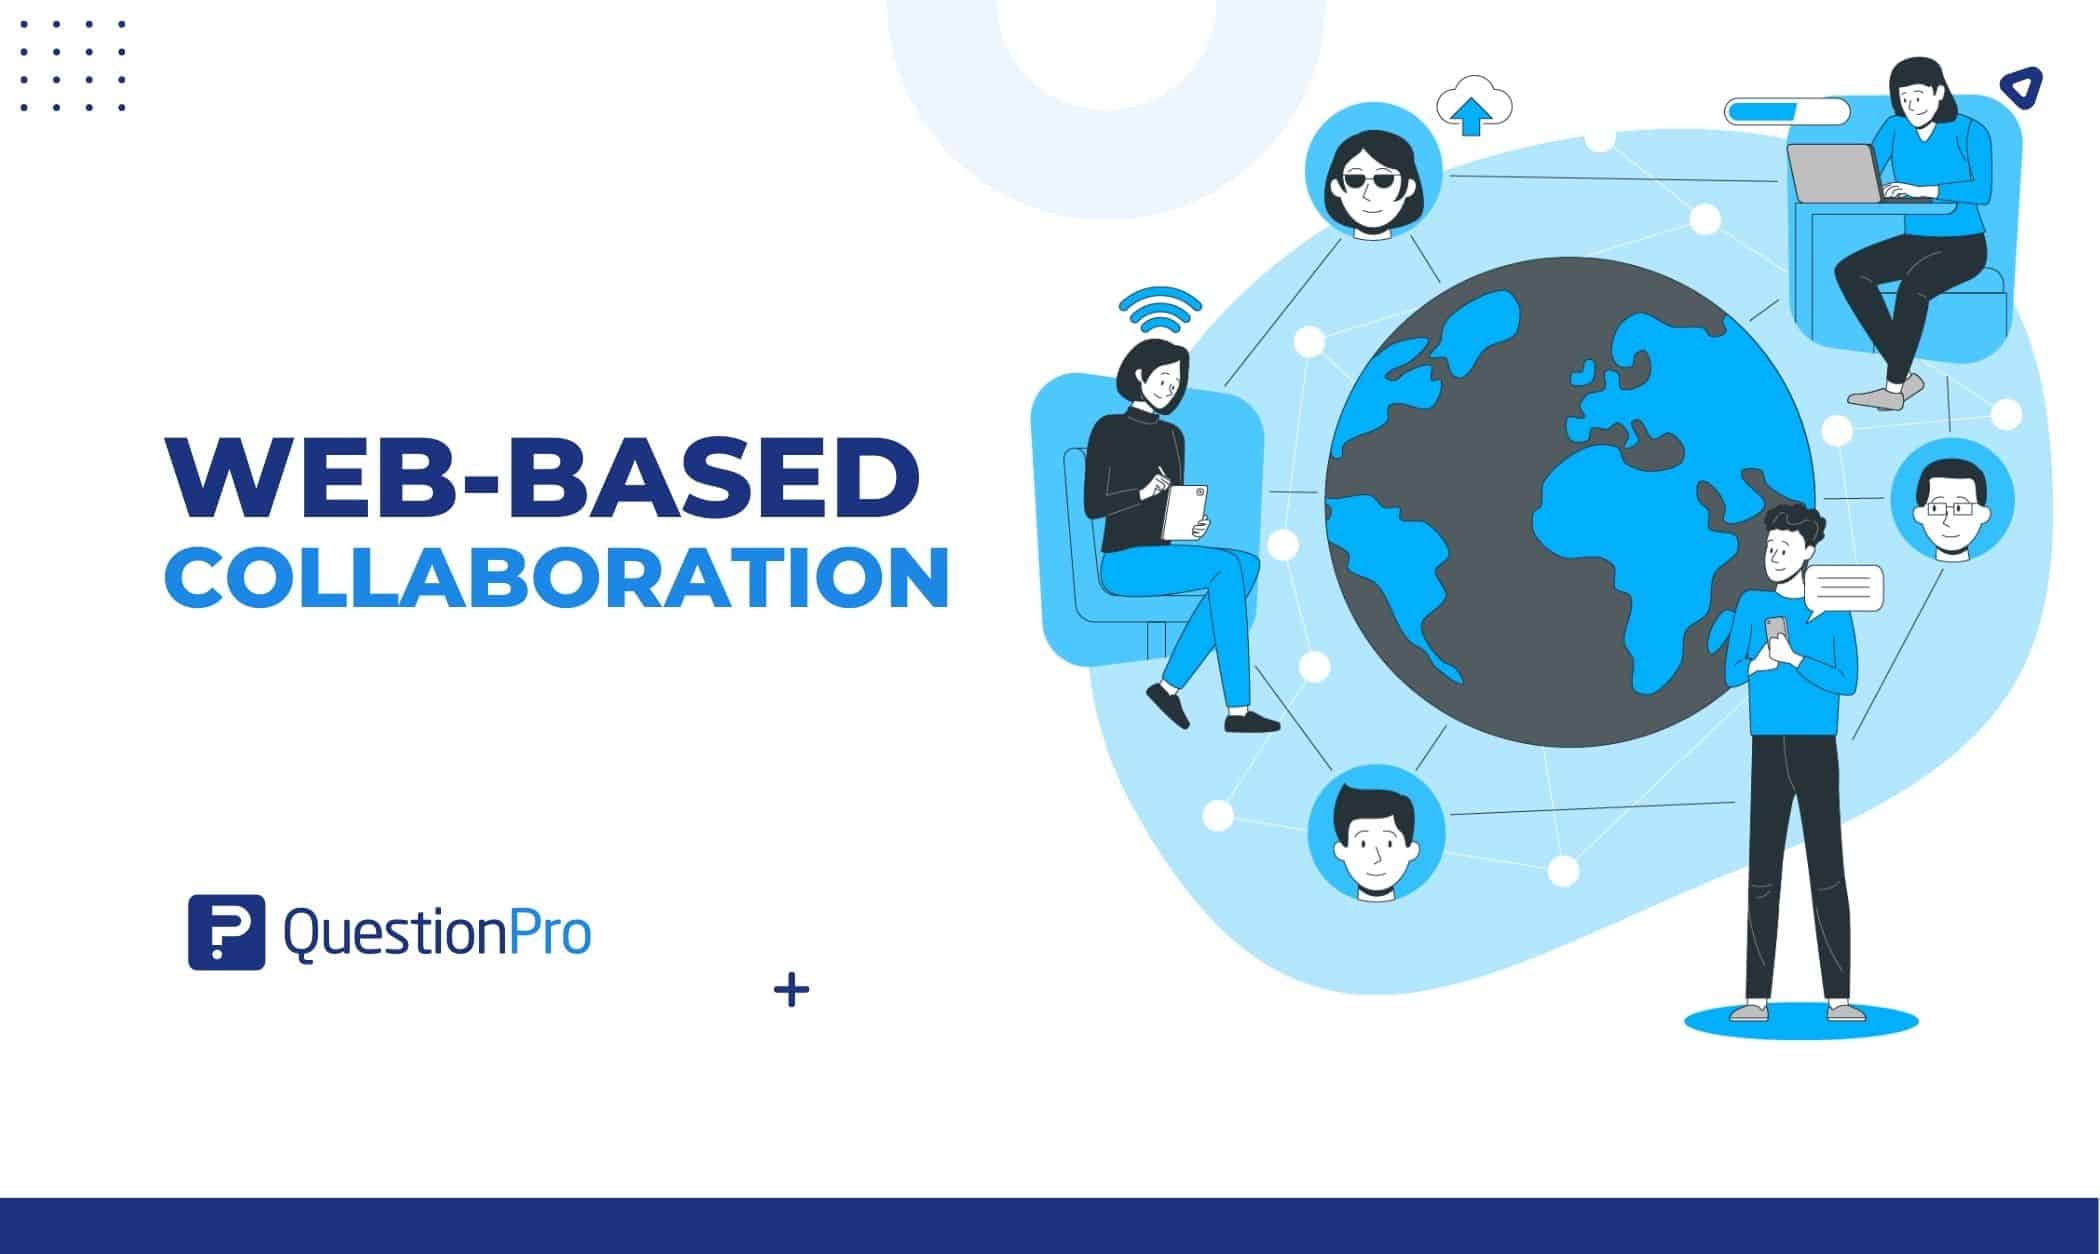 Web-based Collaboration: What is it + Its Do’s and Don’ts